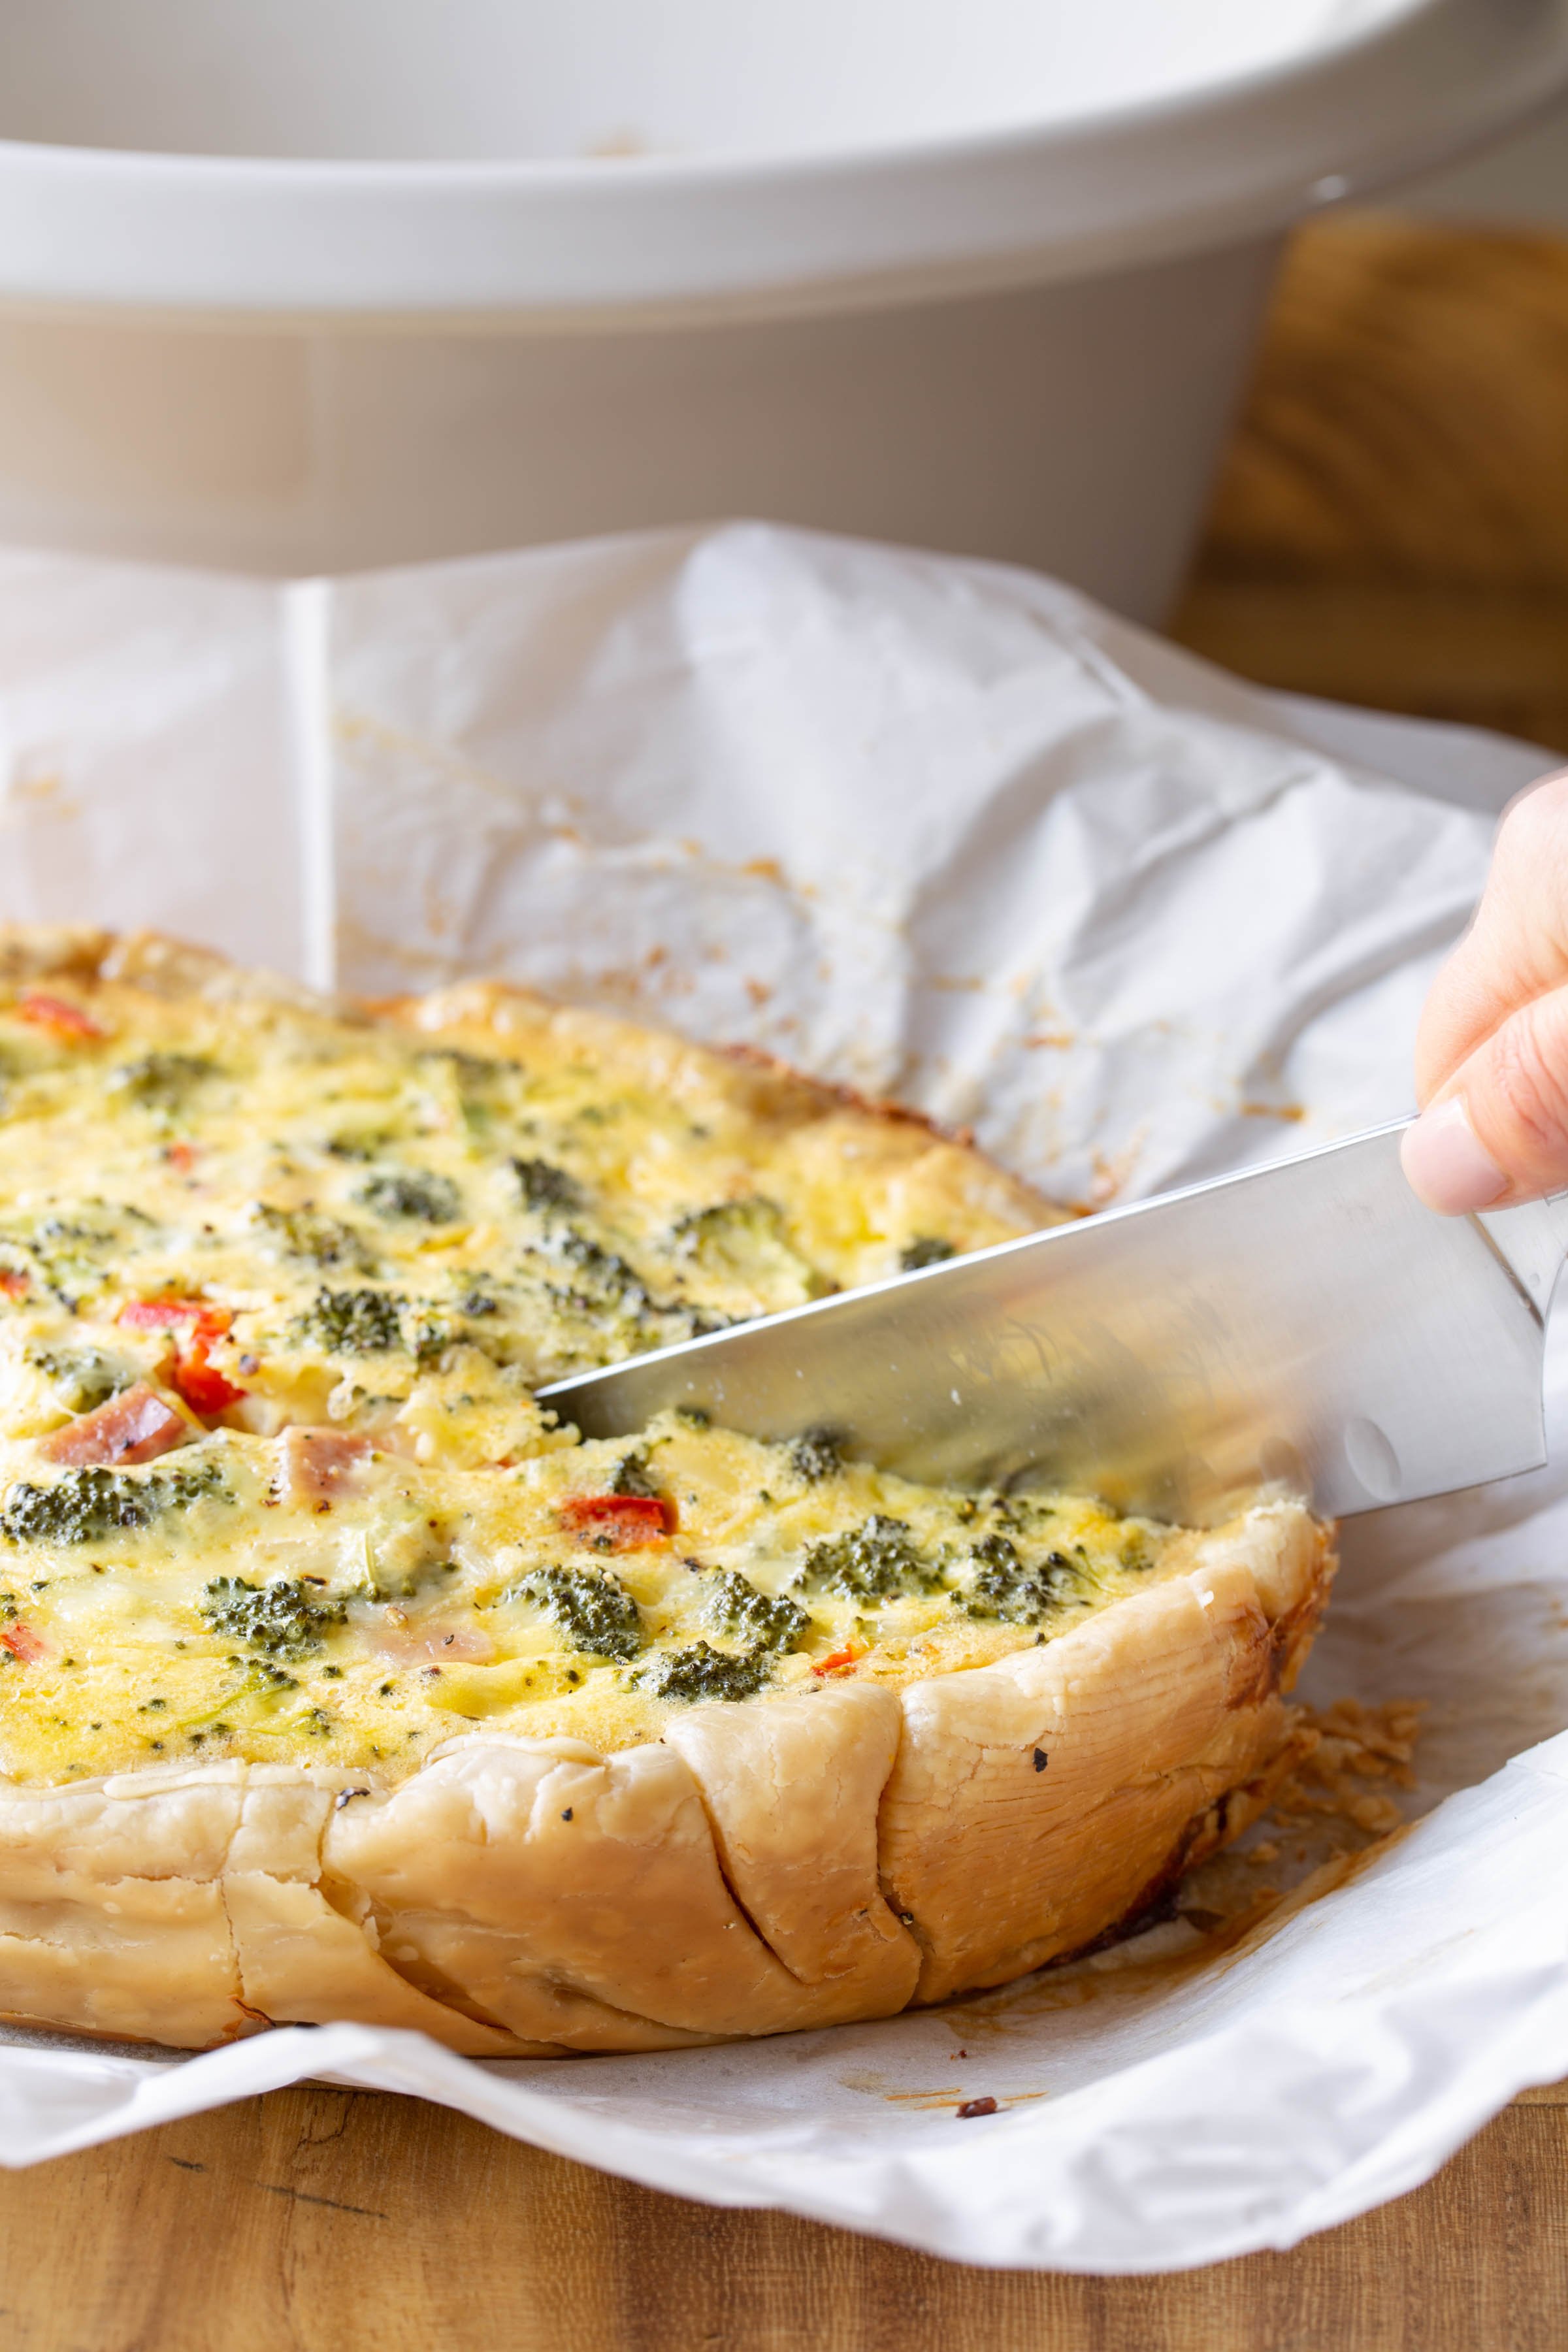 Slow Cooker Easy Breakfast Quiche Recipe - A Spicy Perspective